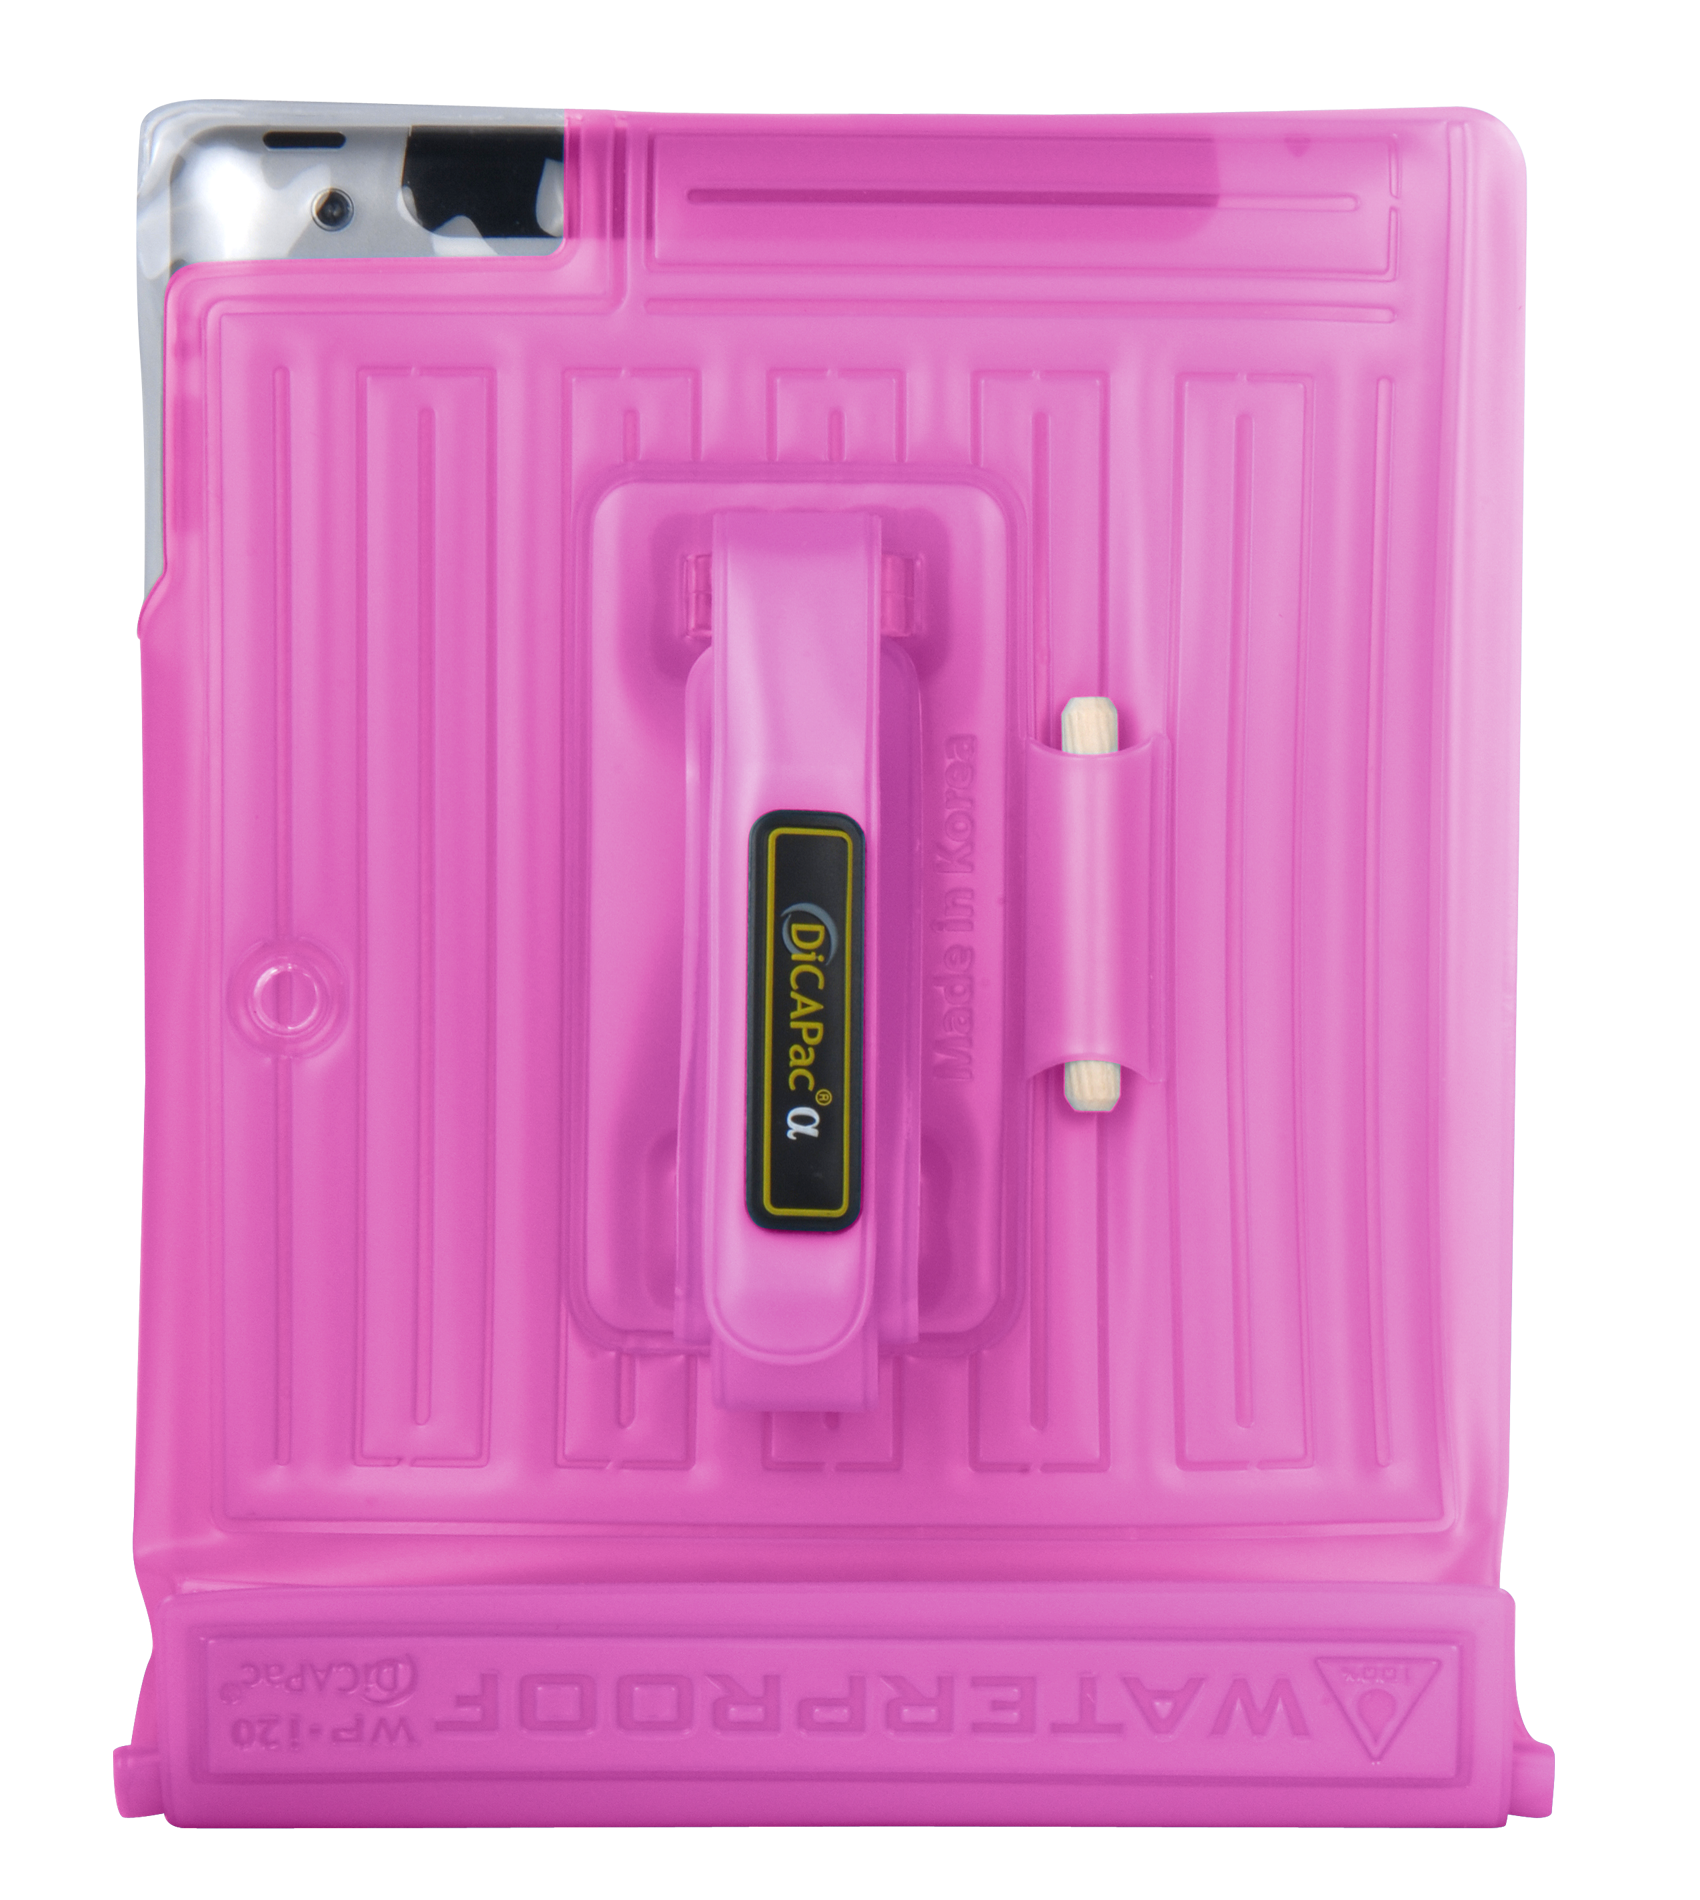 DiCAPac Tablet Case waterproof for iPad™, Pink